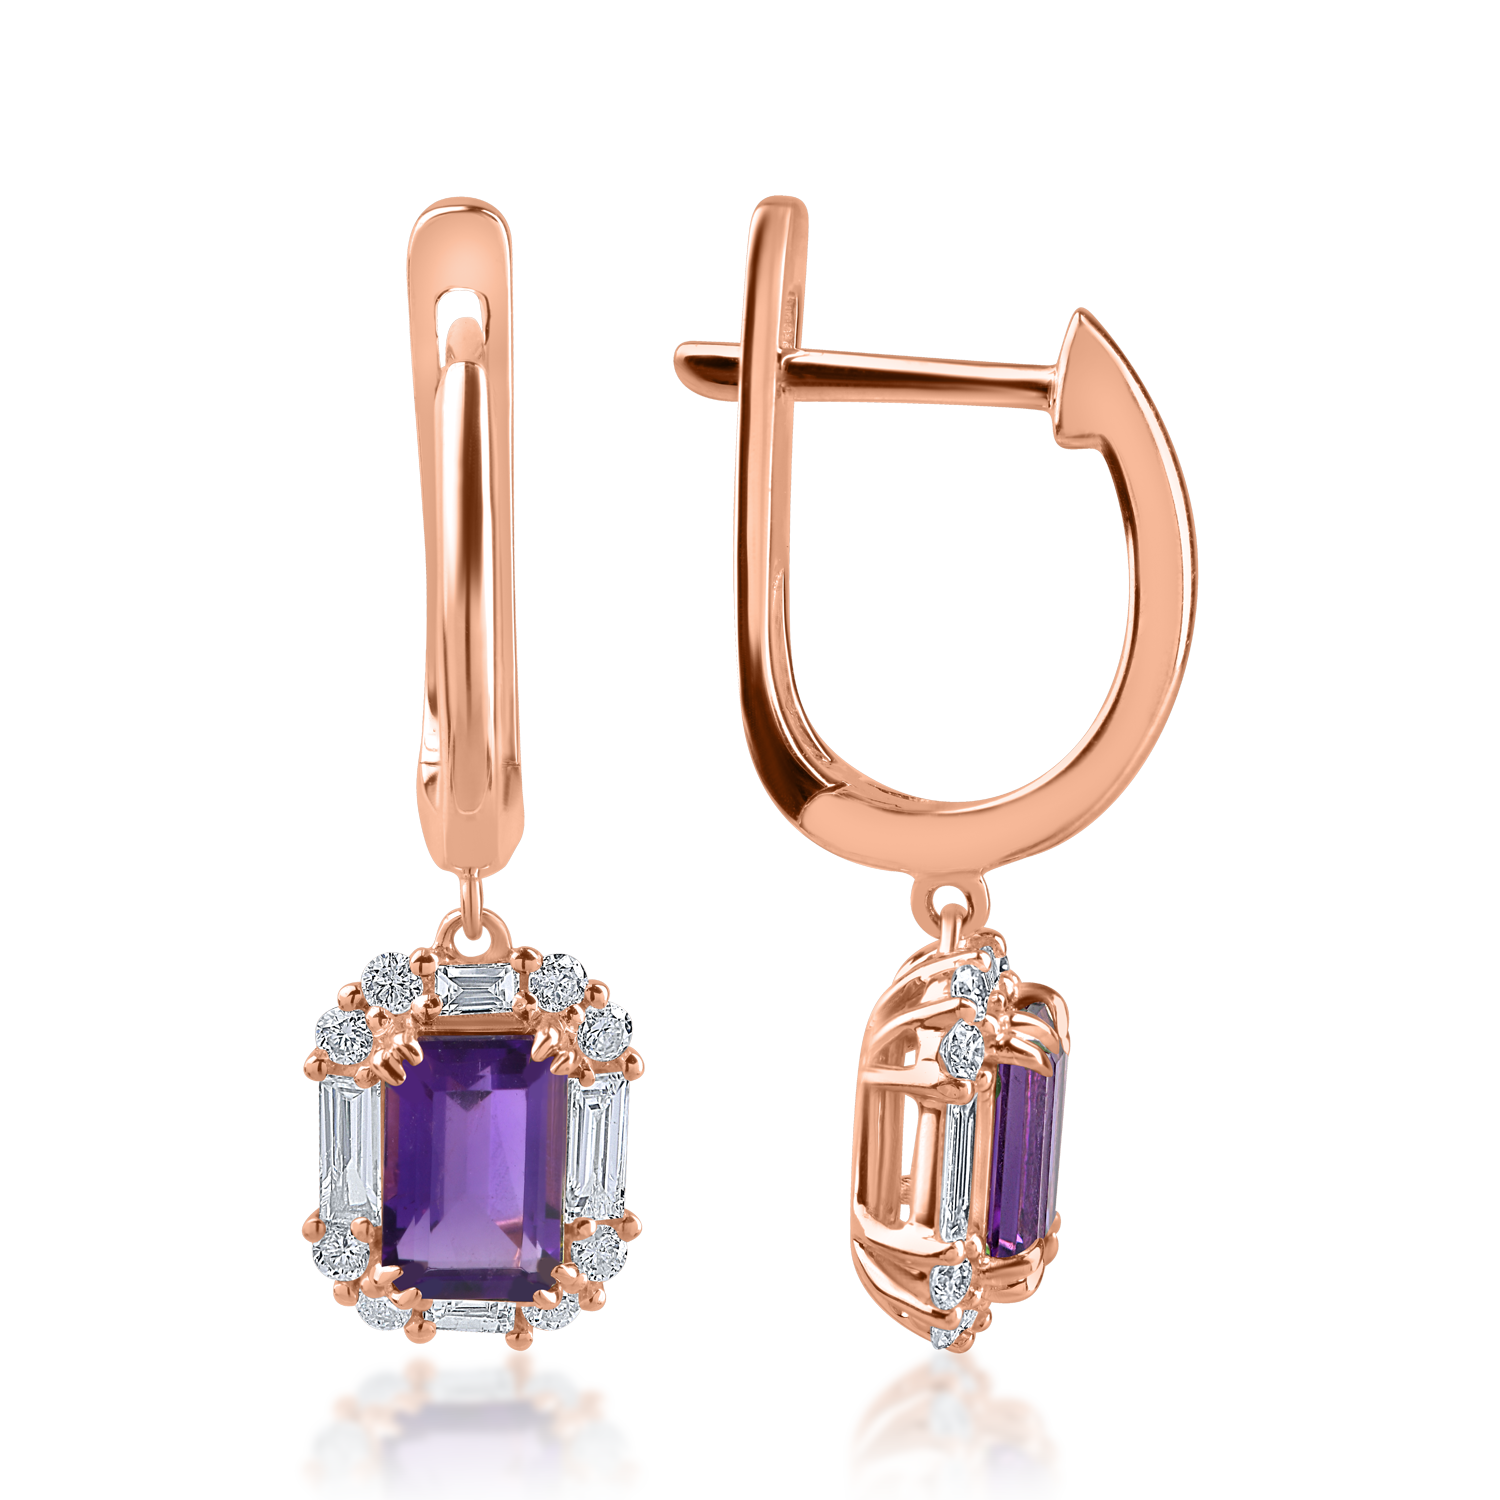 Rose gold earrings with 1.09ct amethysts and 0.38ct diamonds